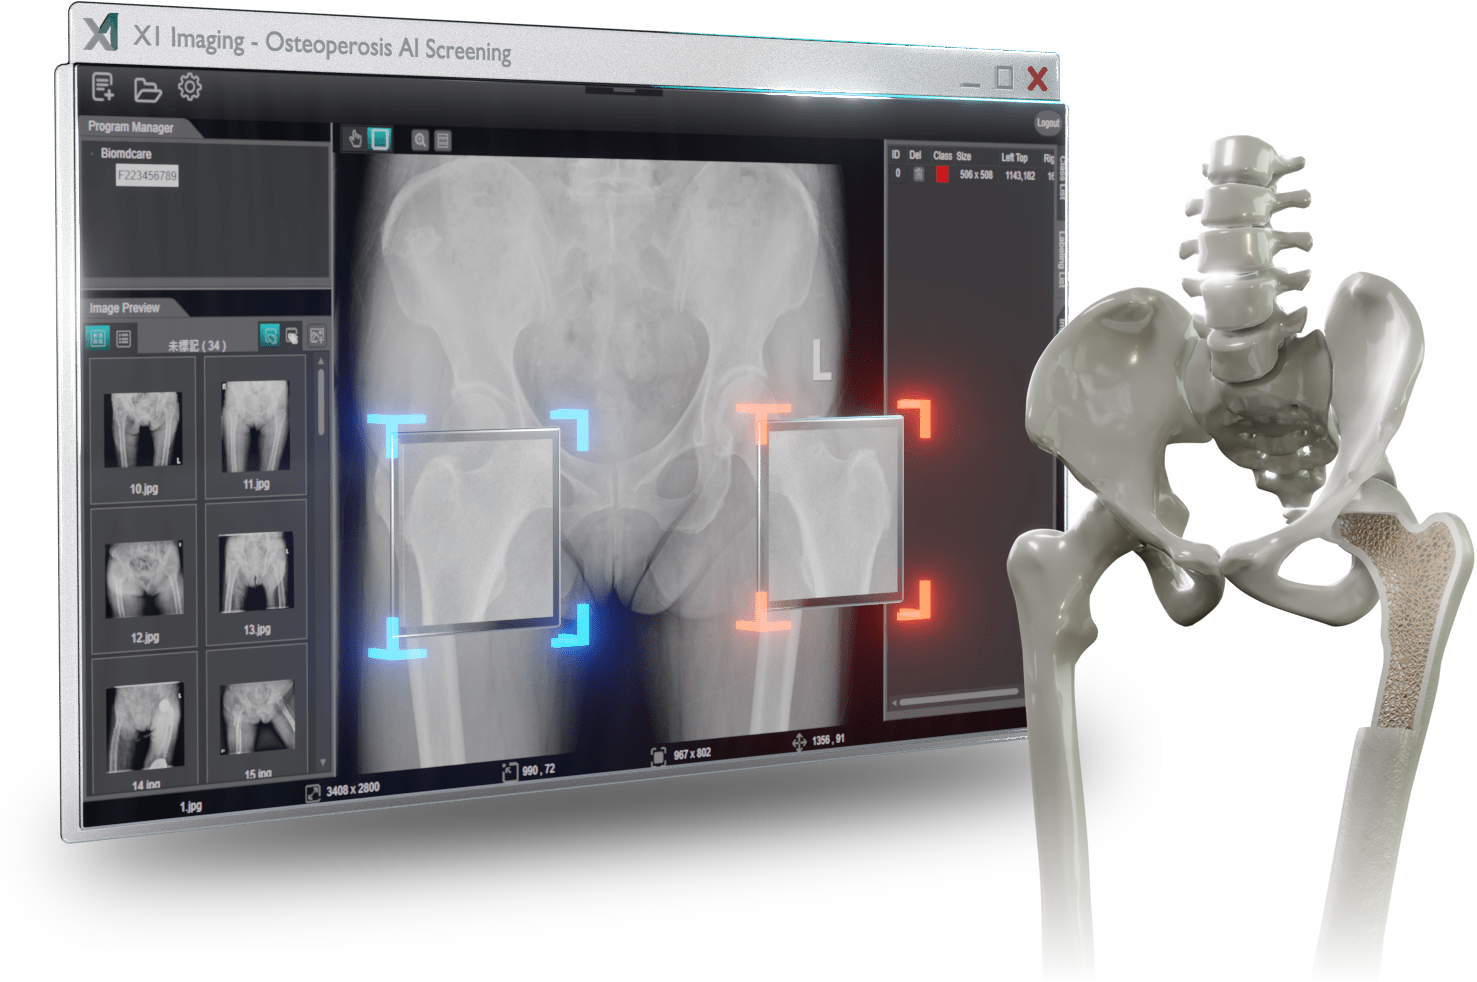 Osteoporosis AI Screening Assistant